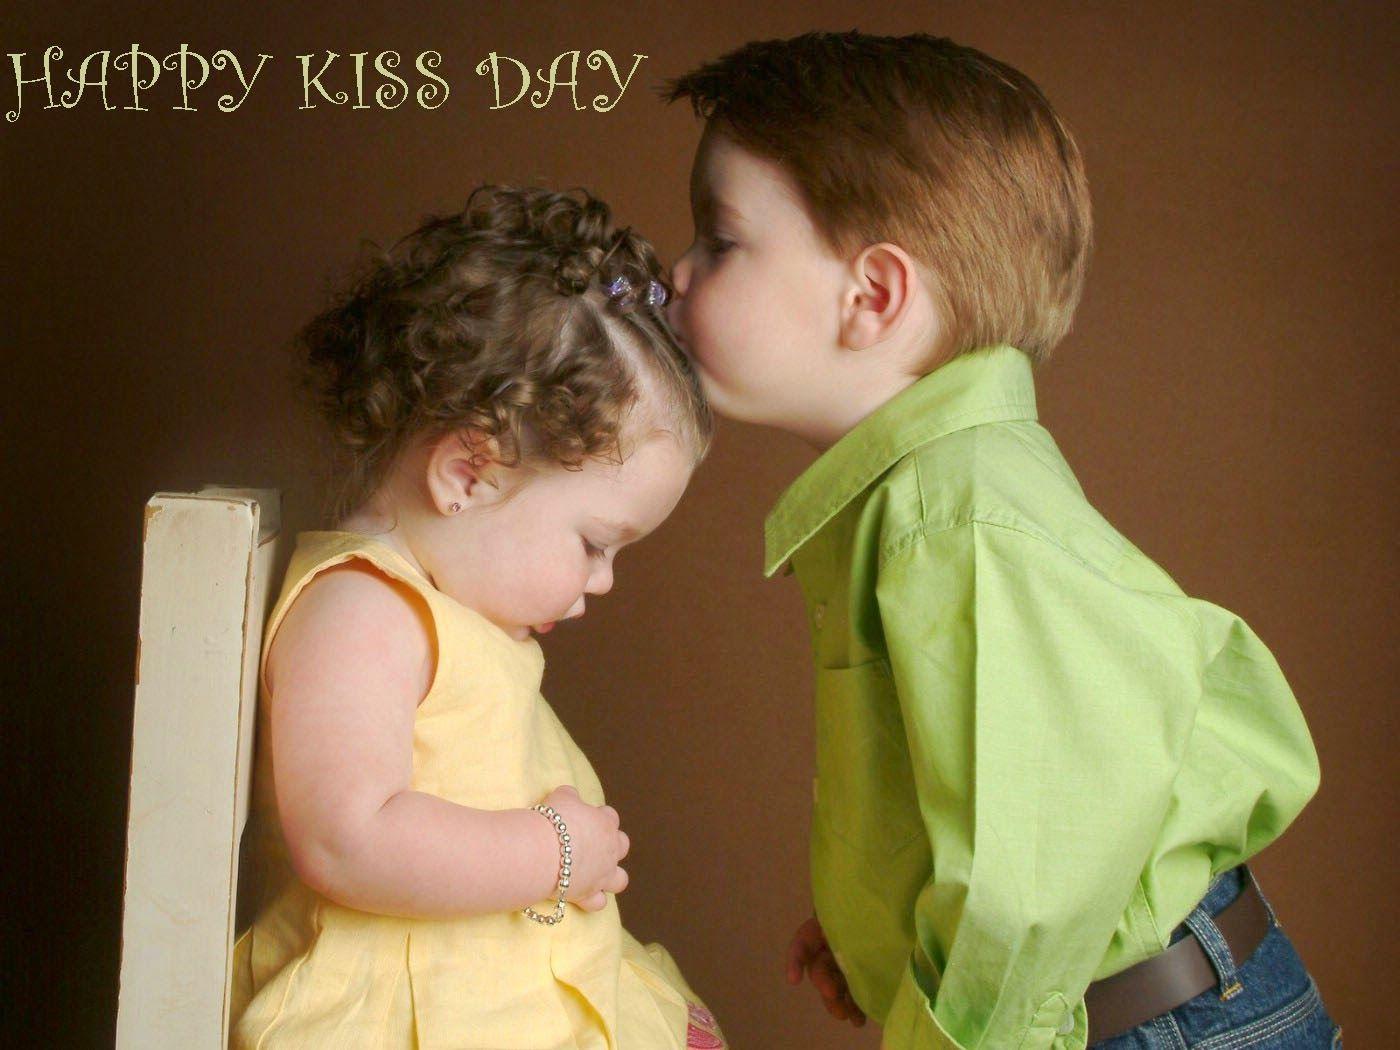 Best*}Greeting Cards For Happy Kiss Day 2016 Love Wallpaper